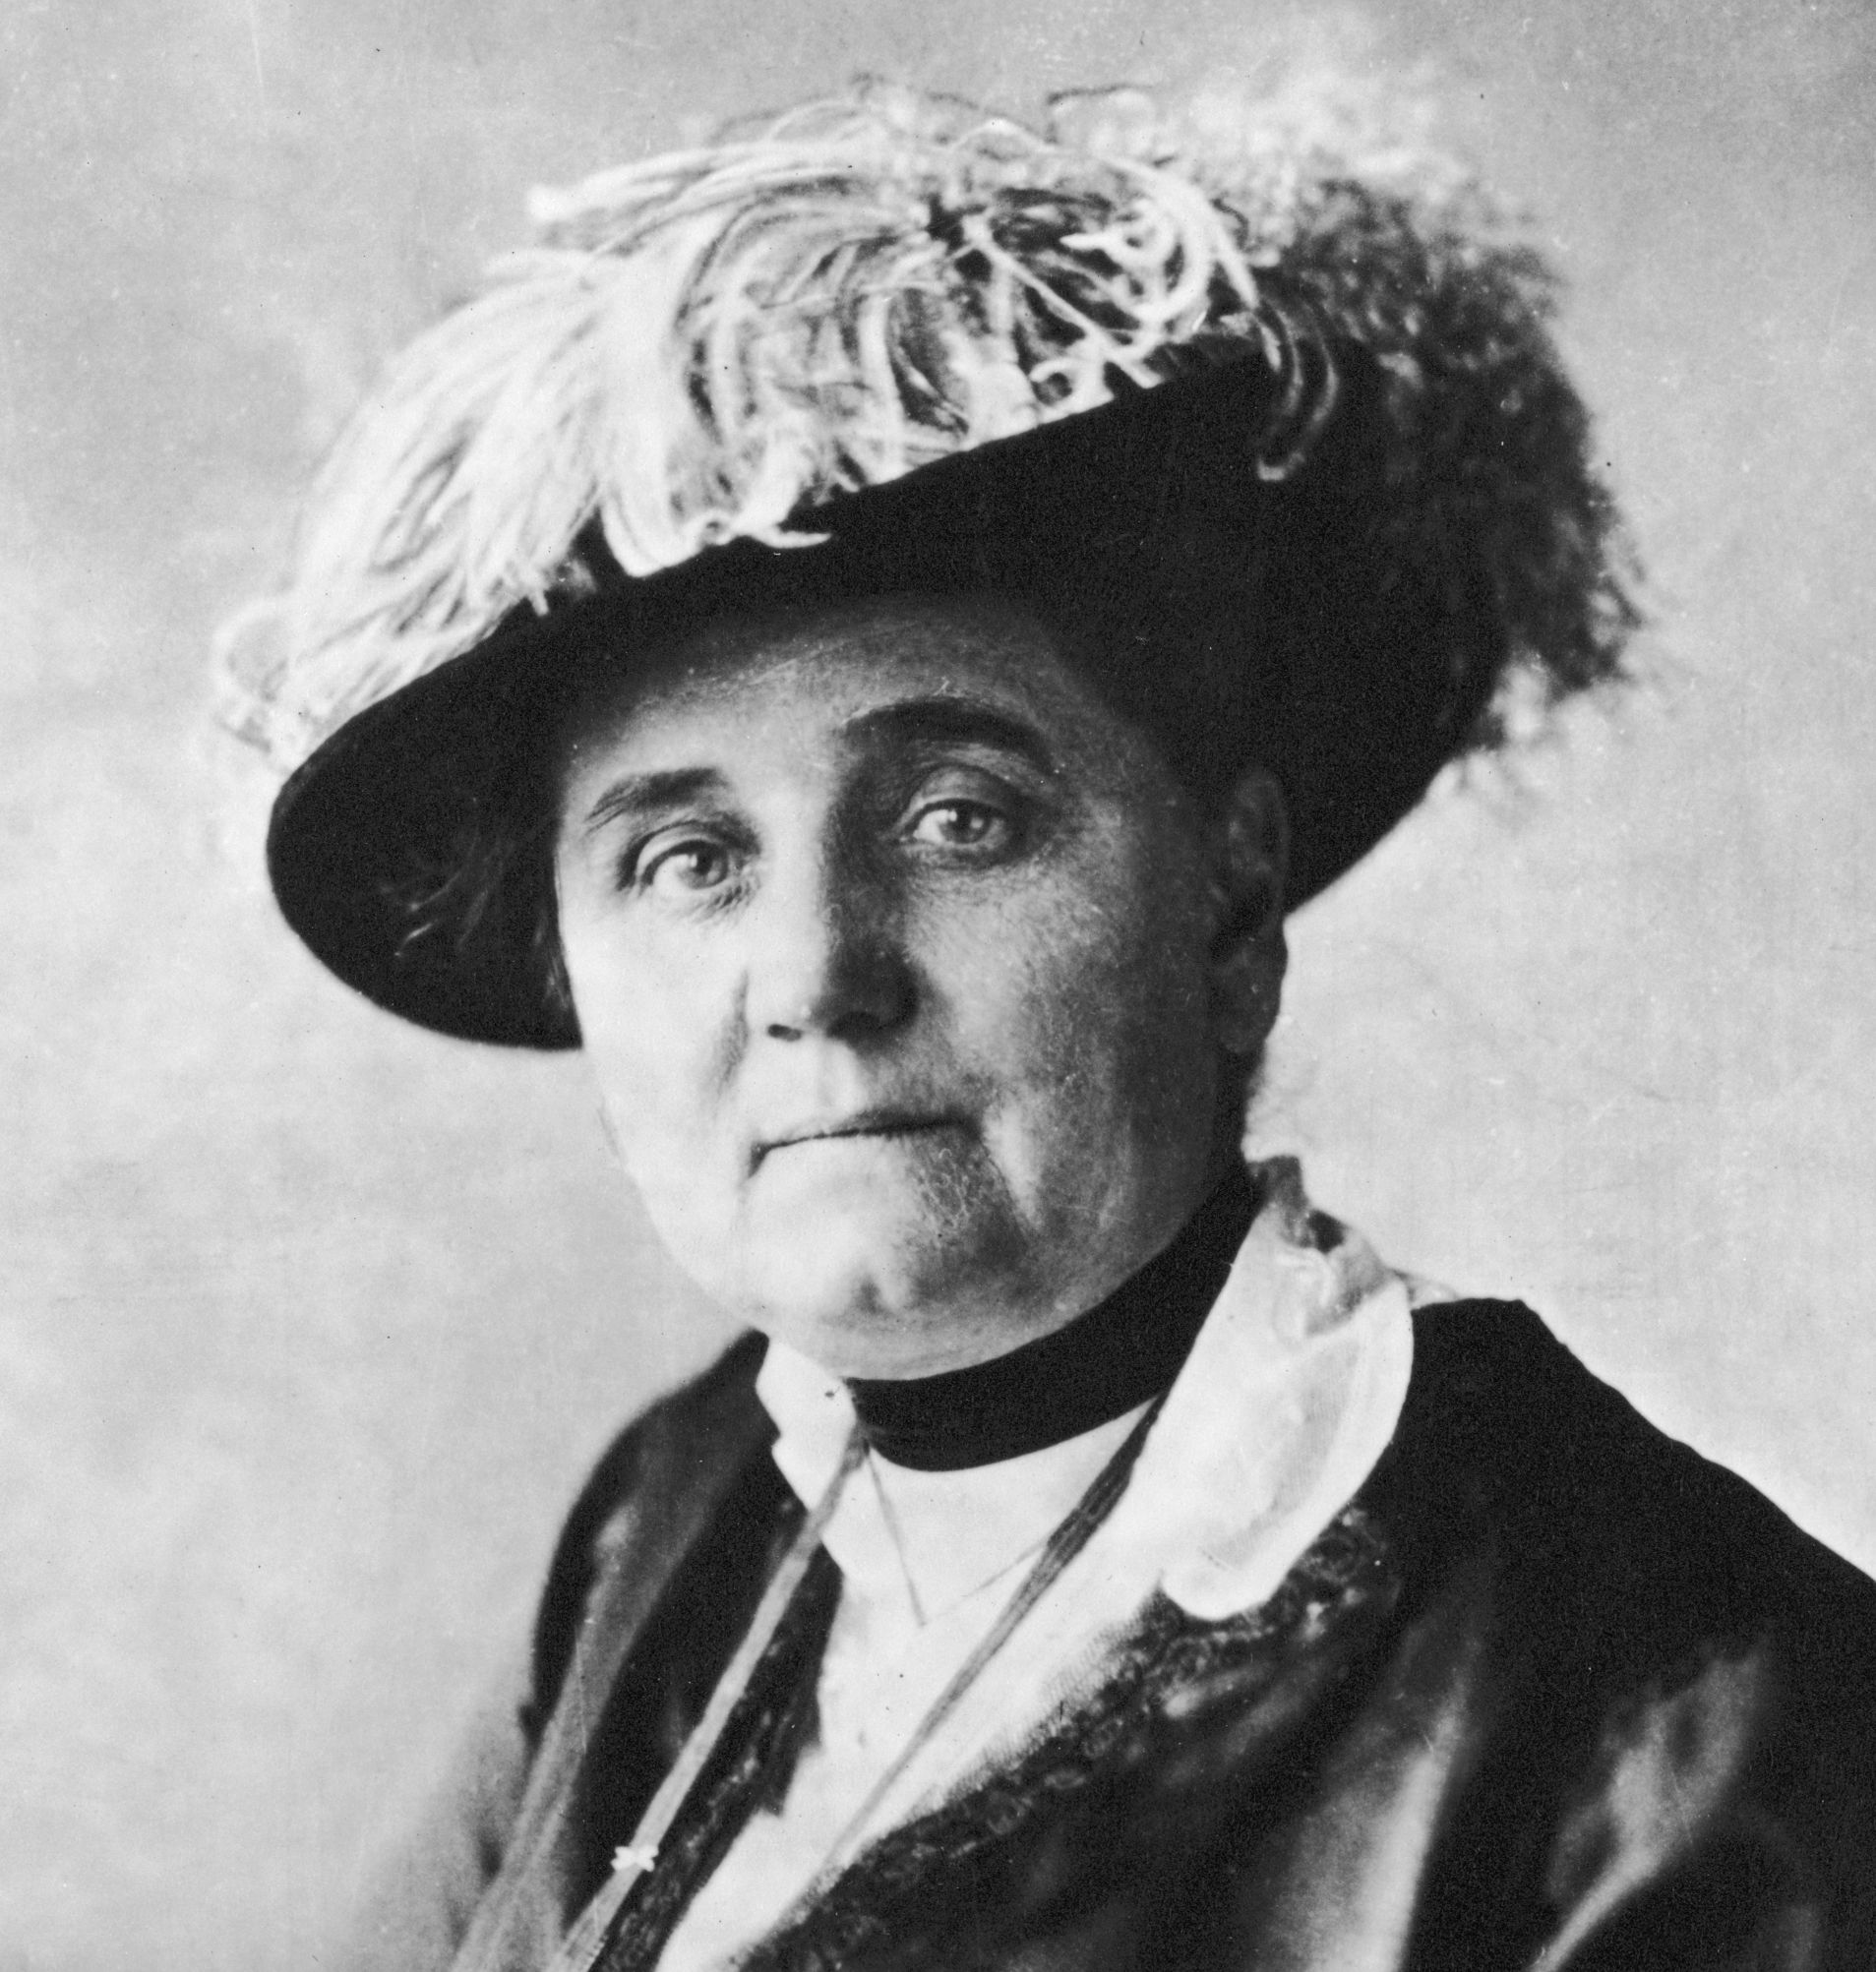 what was jane addams best known for?